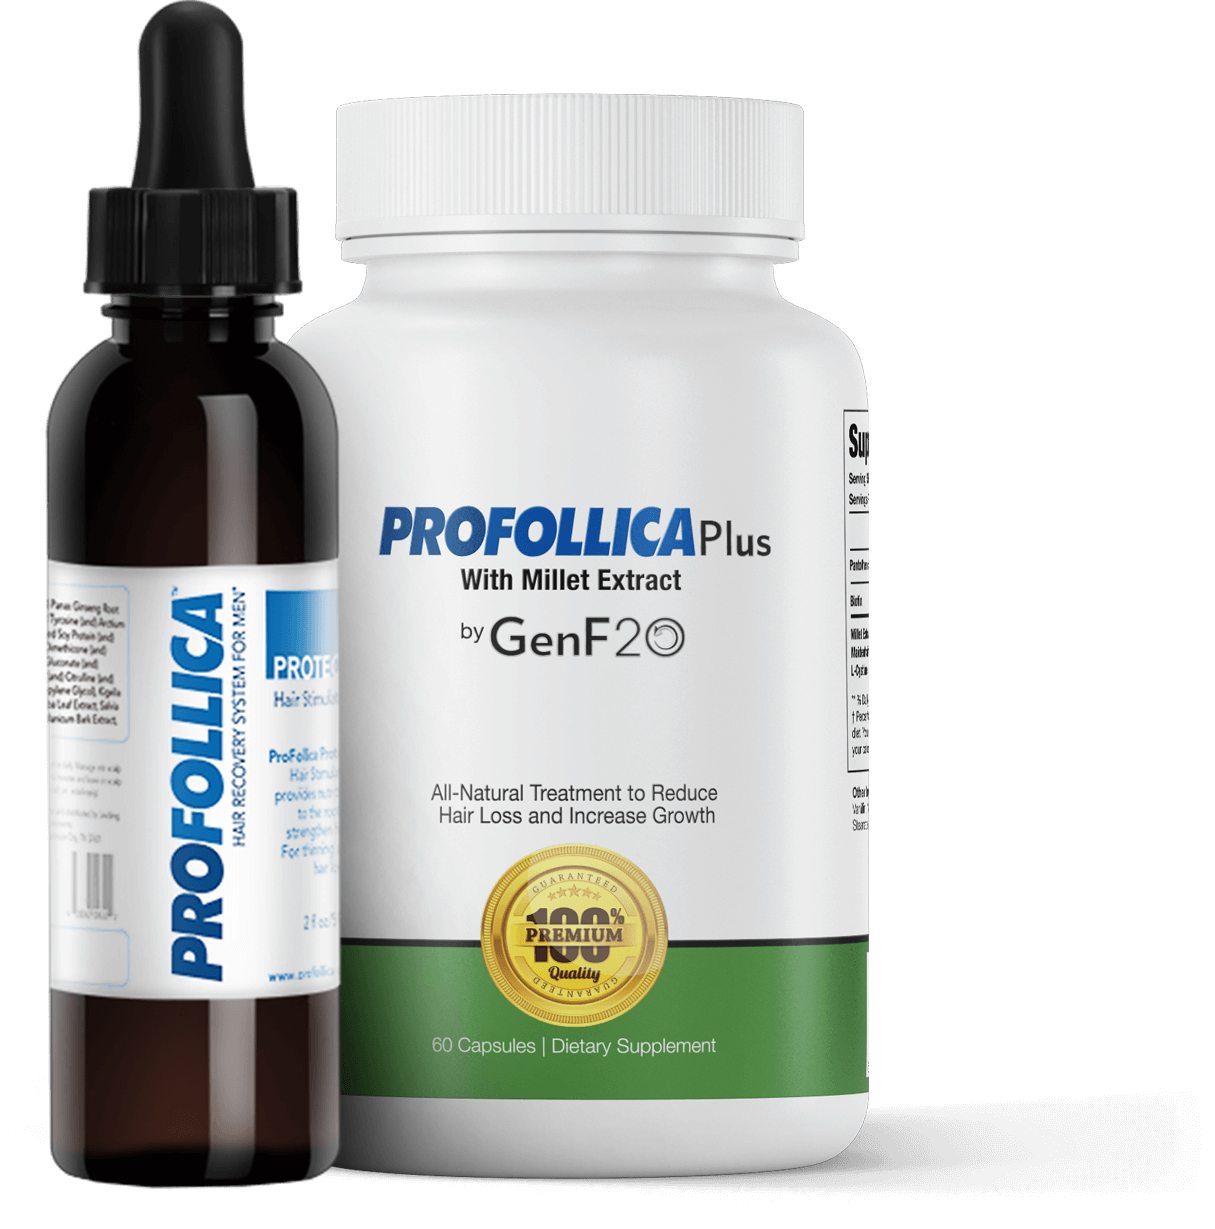 Profollica Product Overview. What Is It?